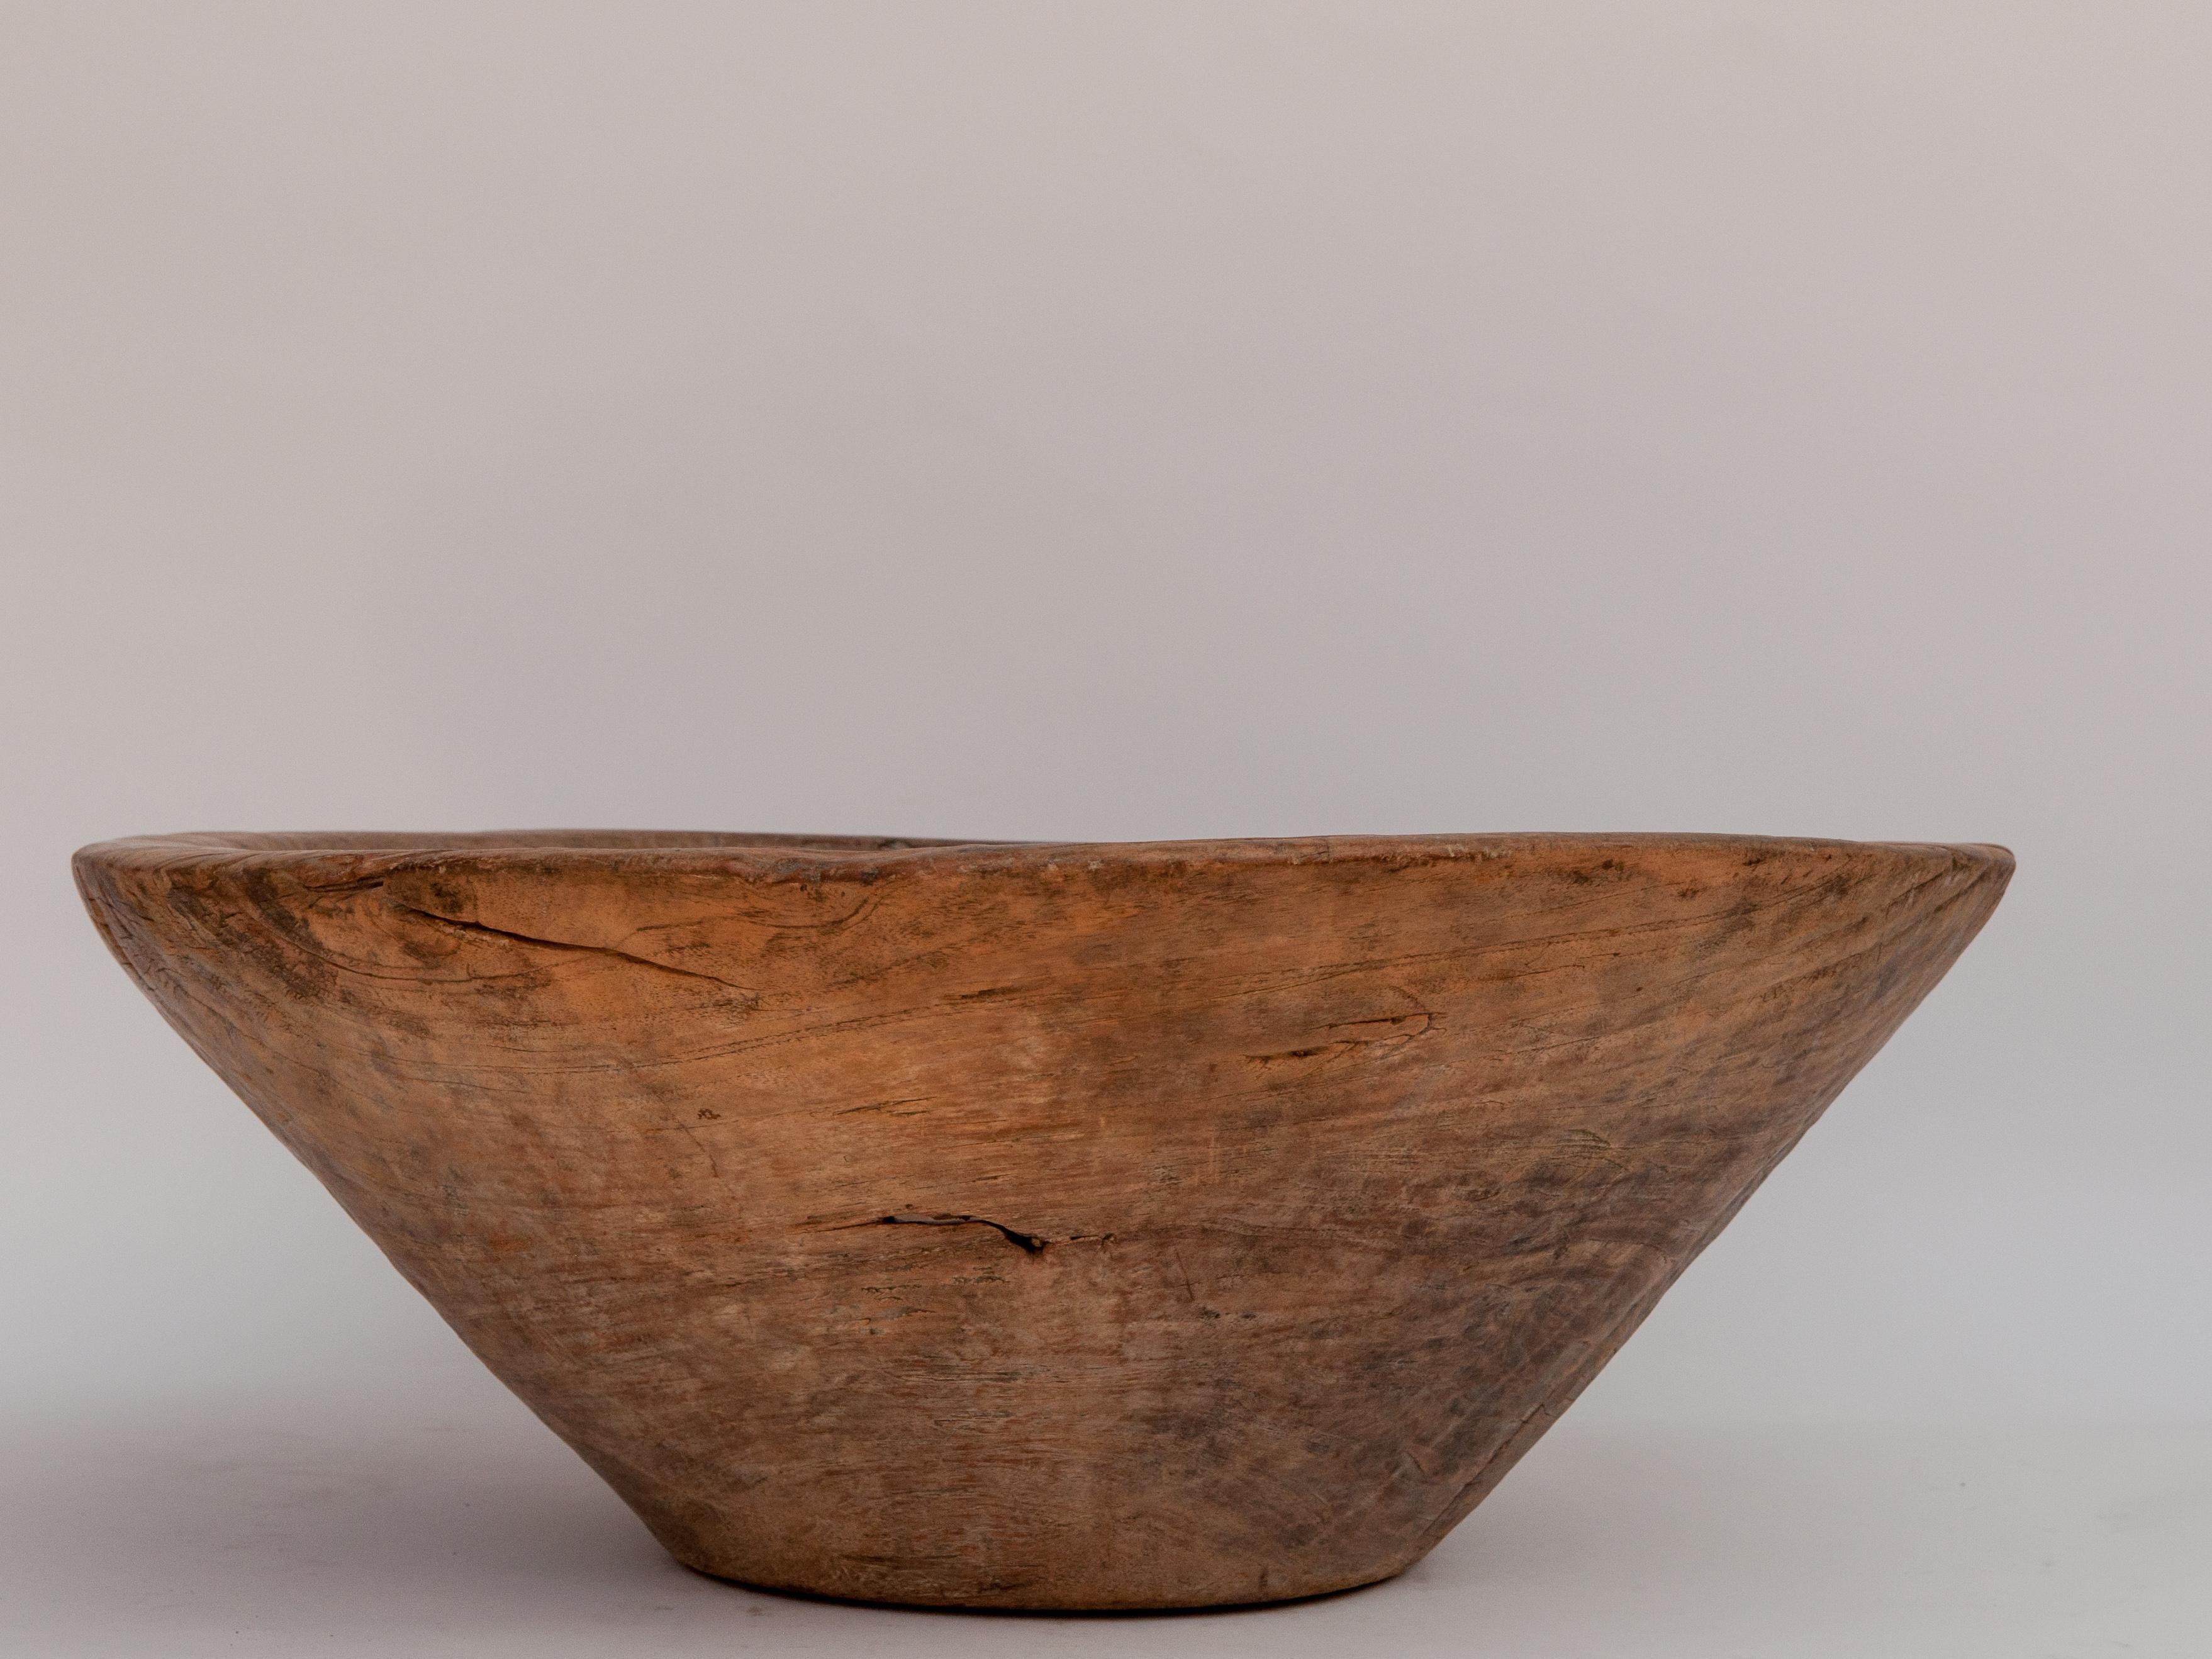 Hand-Crafted Large Vintage Teak Wood Bowl, from North Java, Mid-20th Century